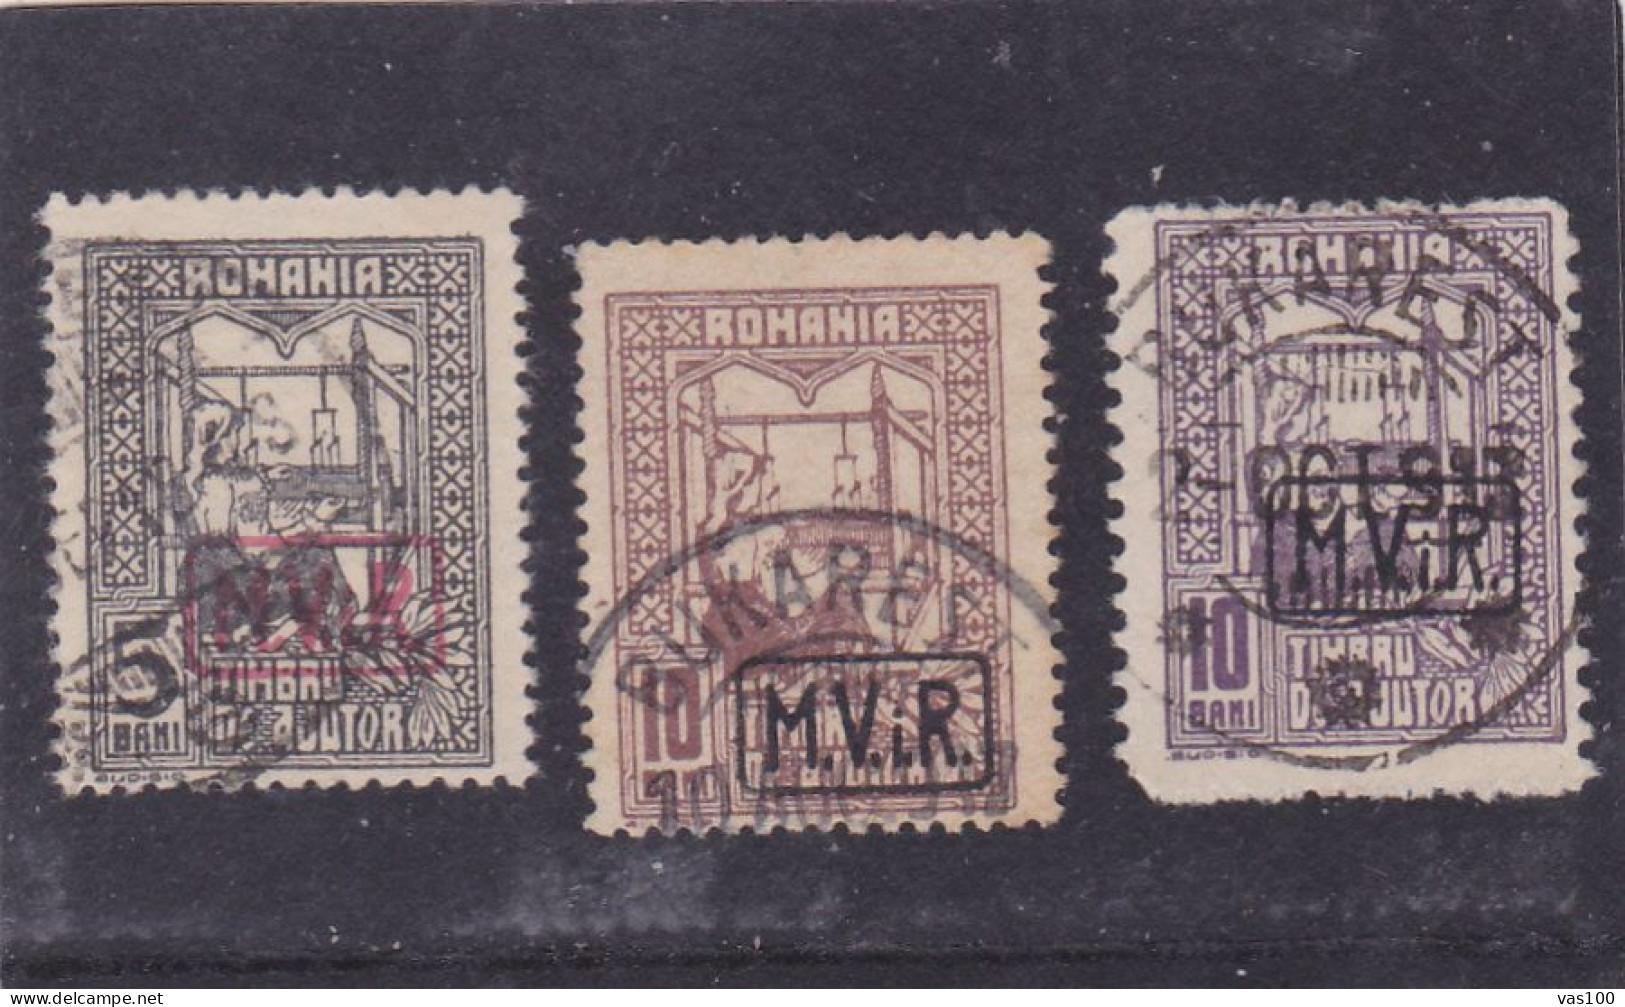 Germany WW1 Occupation In Romania 1917 MViR  3 STAMPS POSTAGE DUE USED - Besetzungen